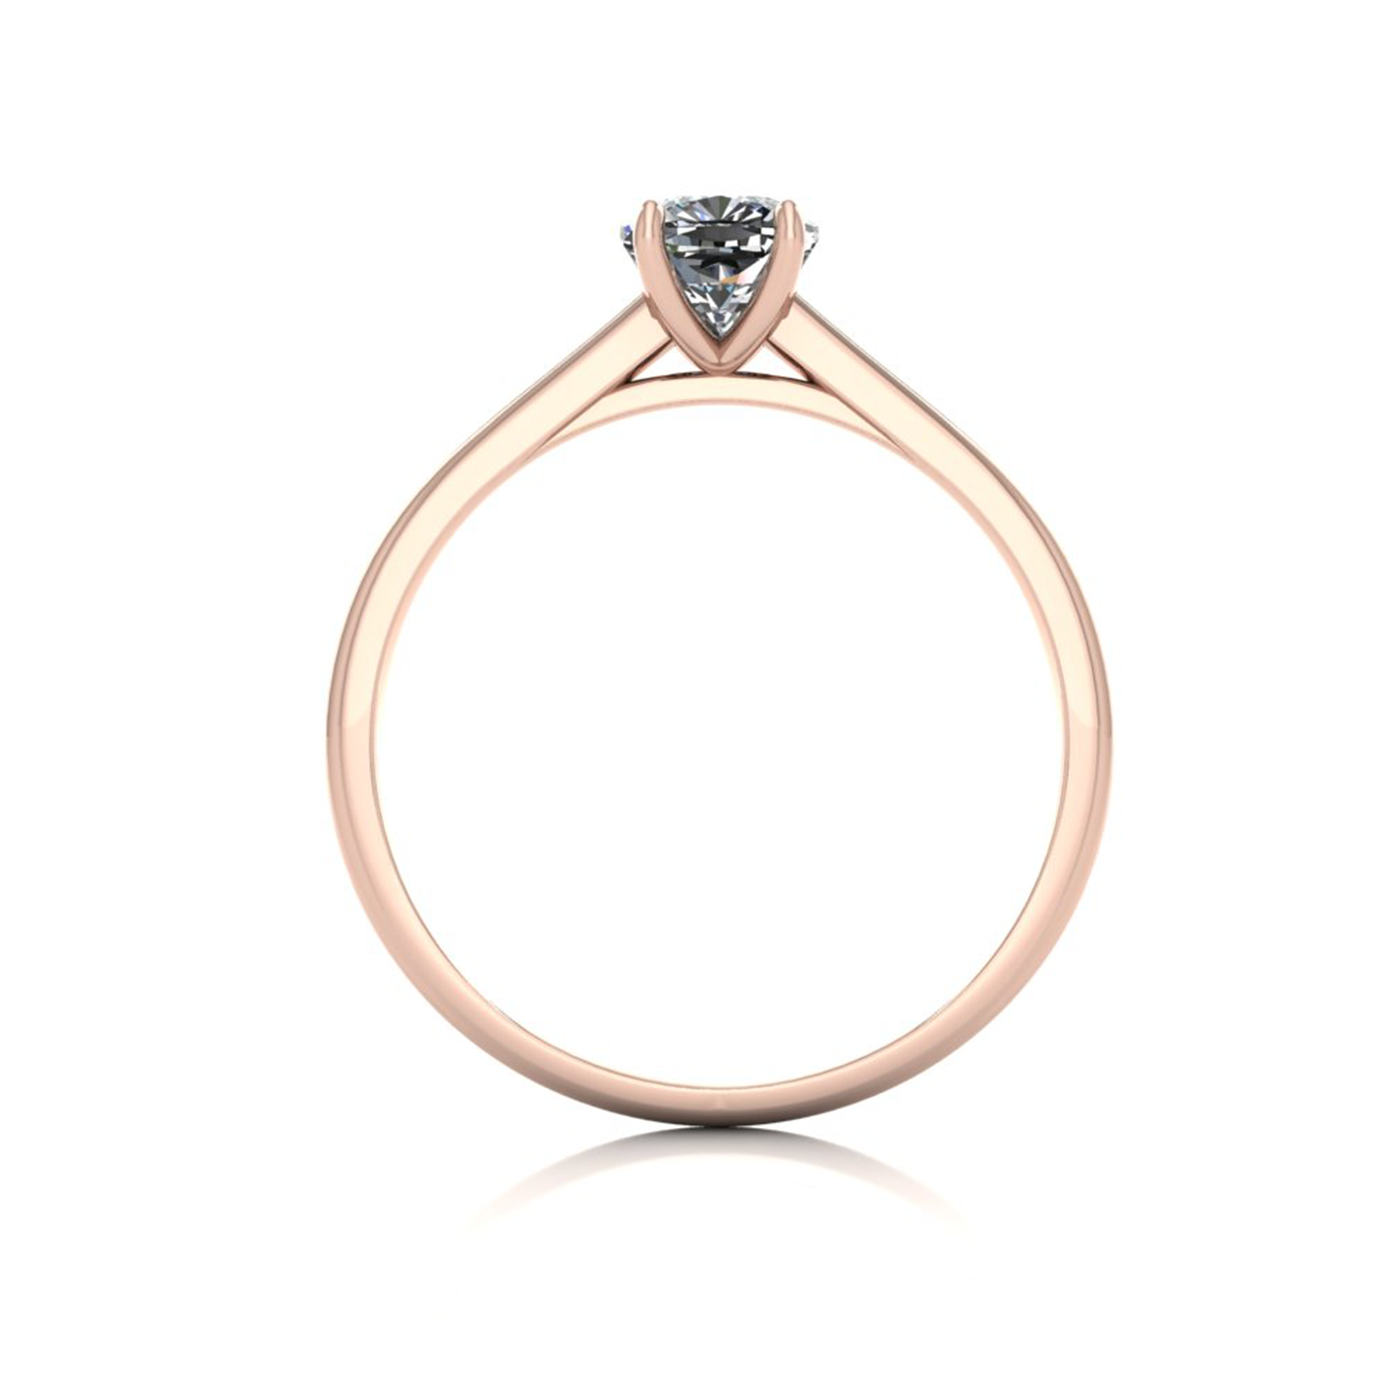 18k rose gold 0,80 ct 4 prongs solitaire cushion cut diamond engagement ring with whisper thin band